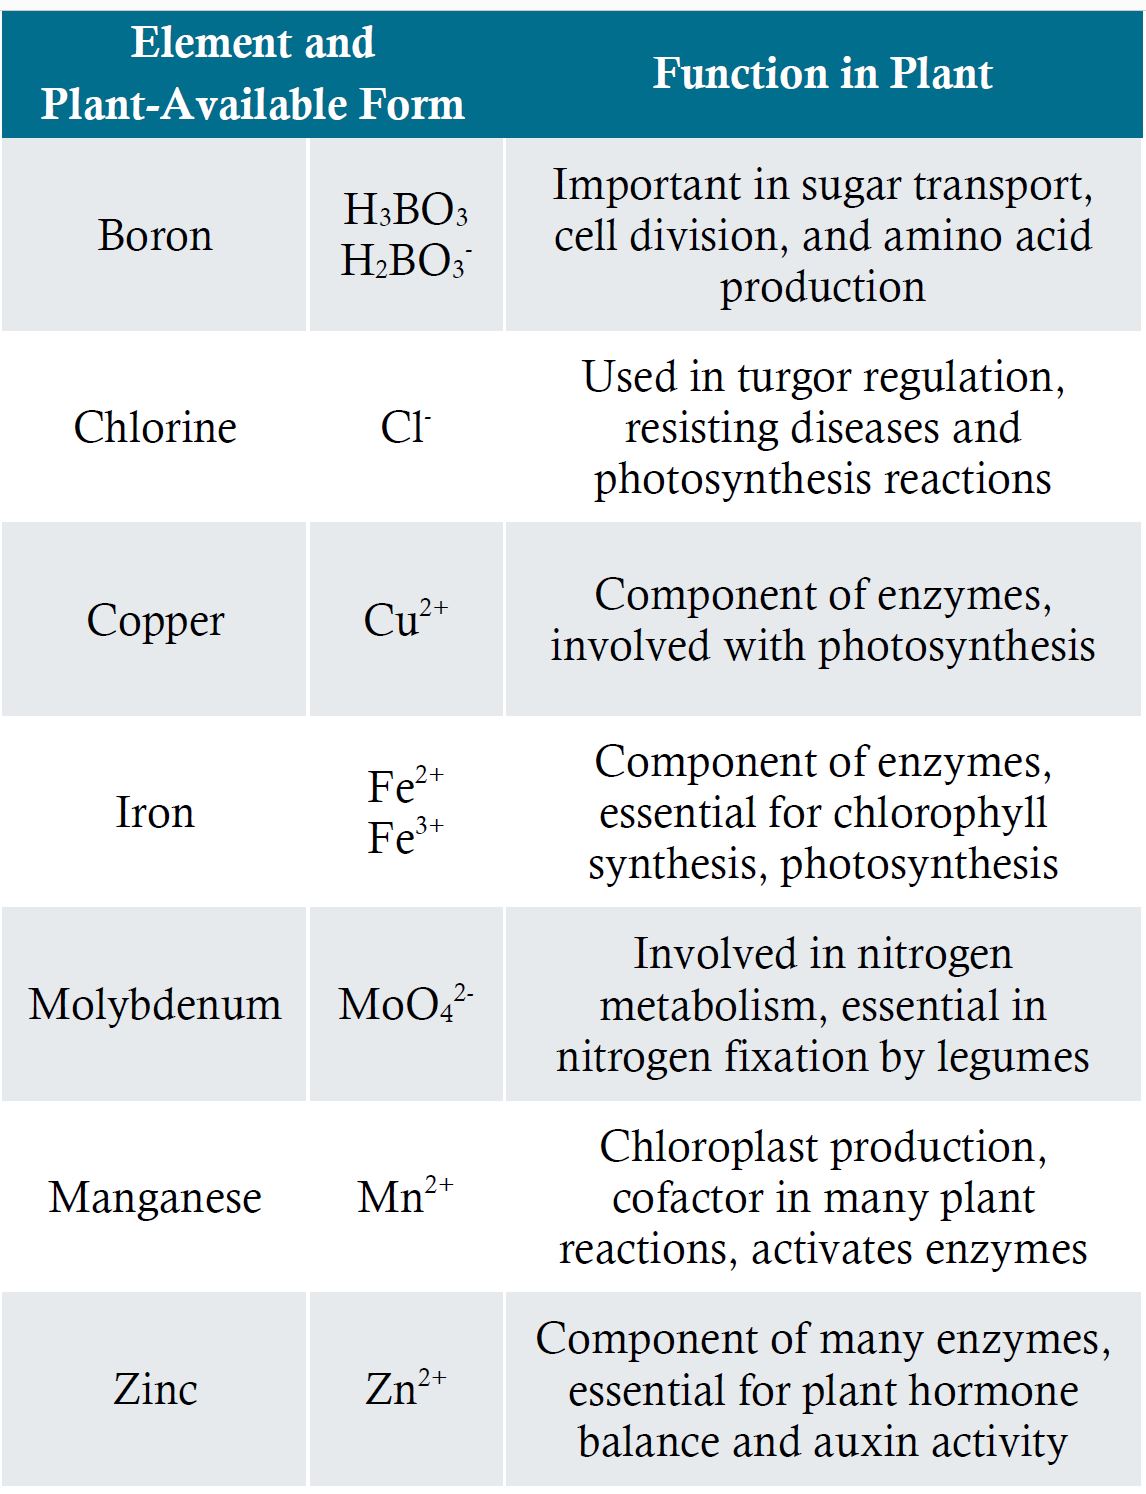 Plant available forms and functions of micro-nutrients in plants